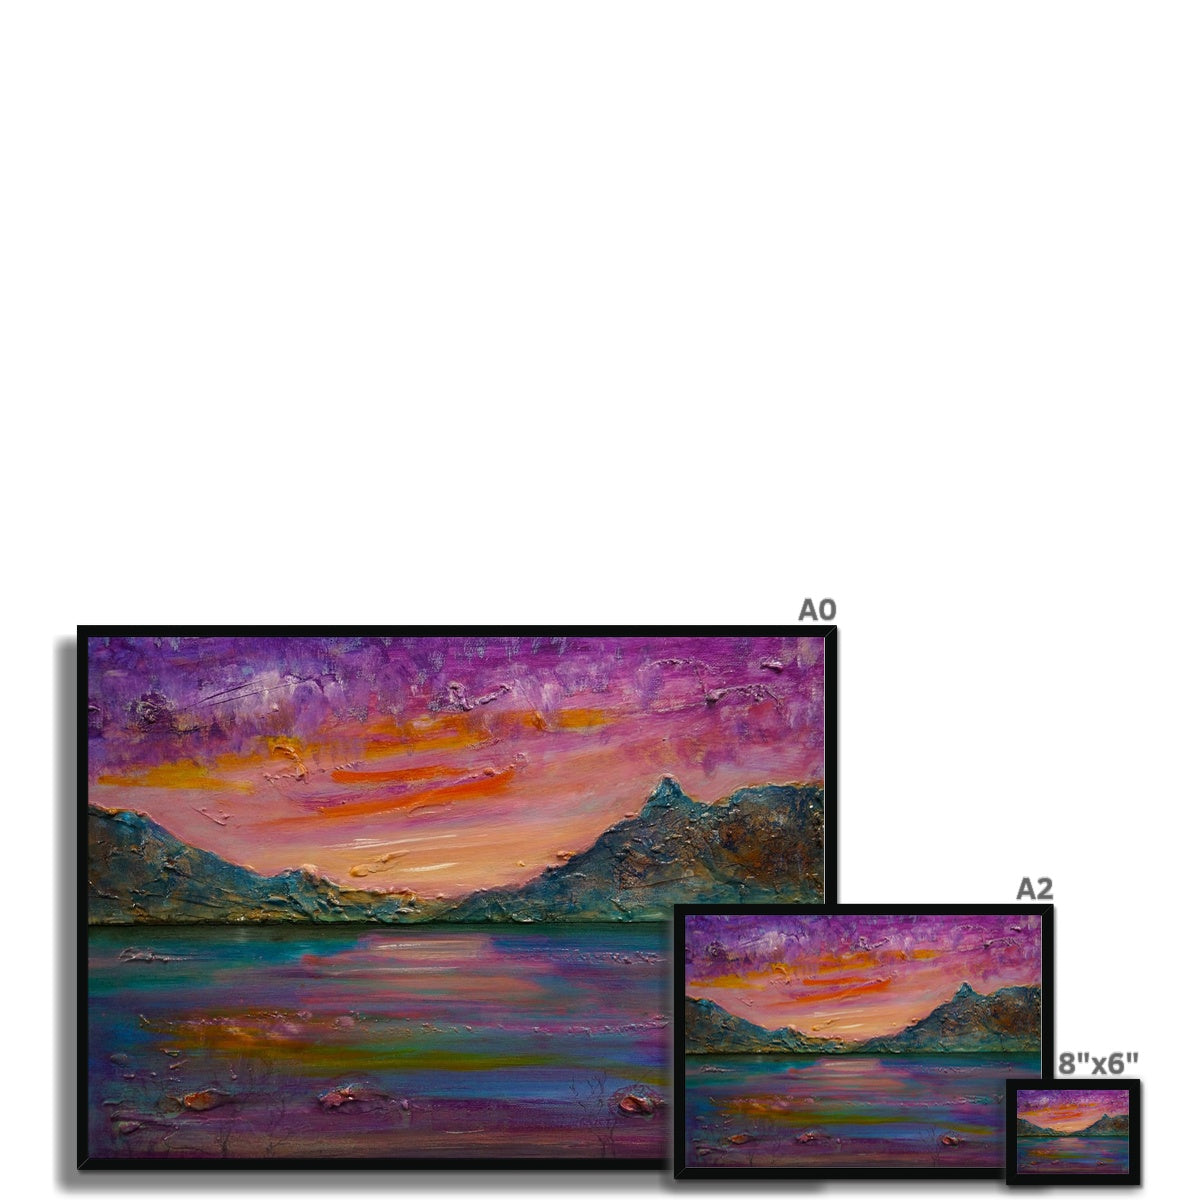 Loch Leven Sunset Painting | Framed Prints From Scotland-Framed Prints-Scottish Lochs & Mountains Art Gallery-Paintings, Prints, Homeware, Art Gifts From Scotland By Scottish Artist Kevin Hunter